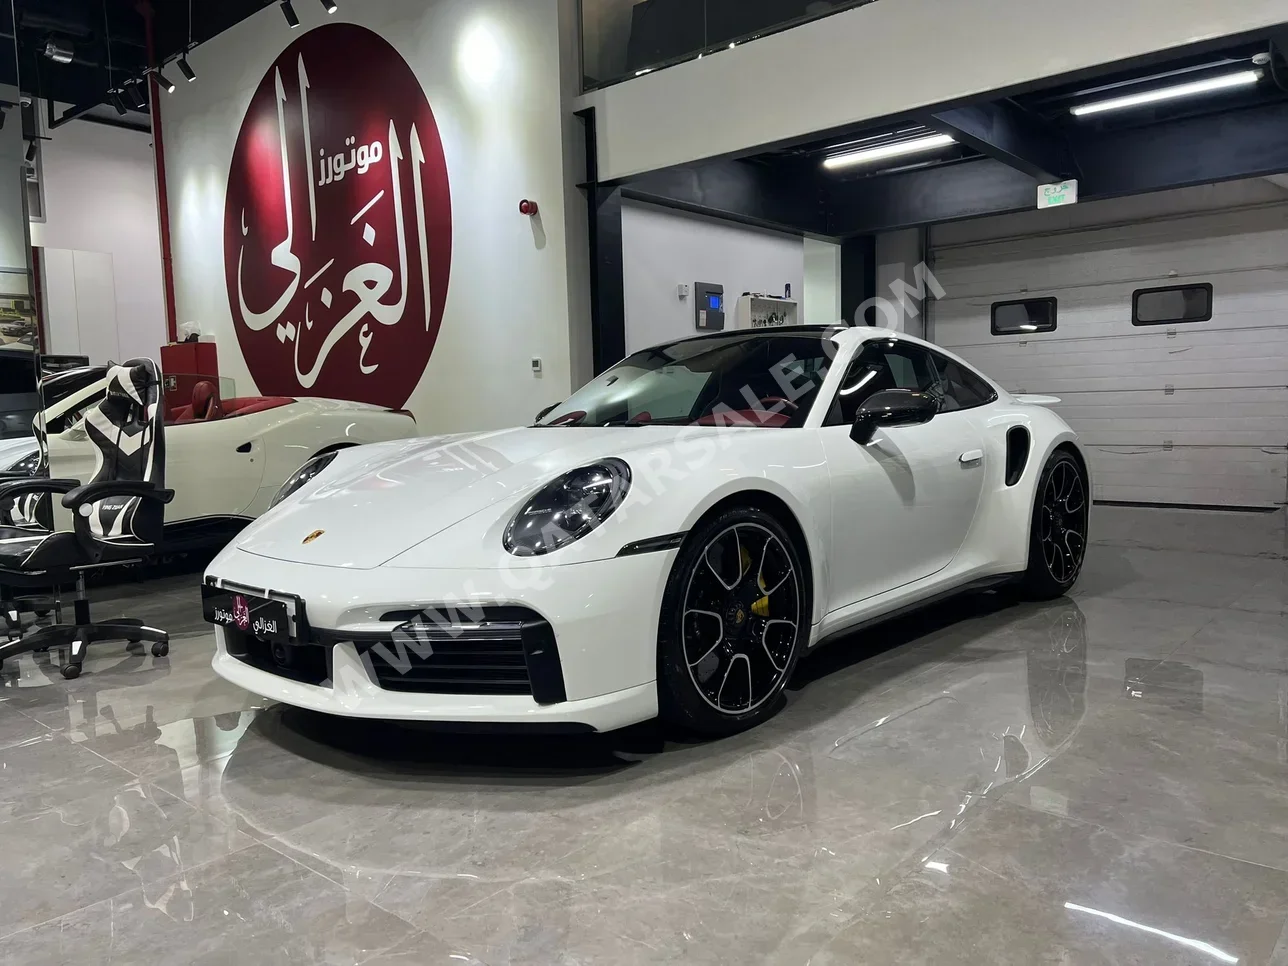  Porsche  911  Turbo S  2022  Automatic  26,000 Km  6 Cylinder  Rear Wheel Drive (RWD)  Coupe / Sport  White  With Warranty